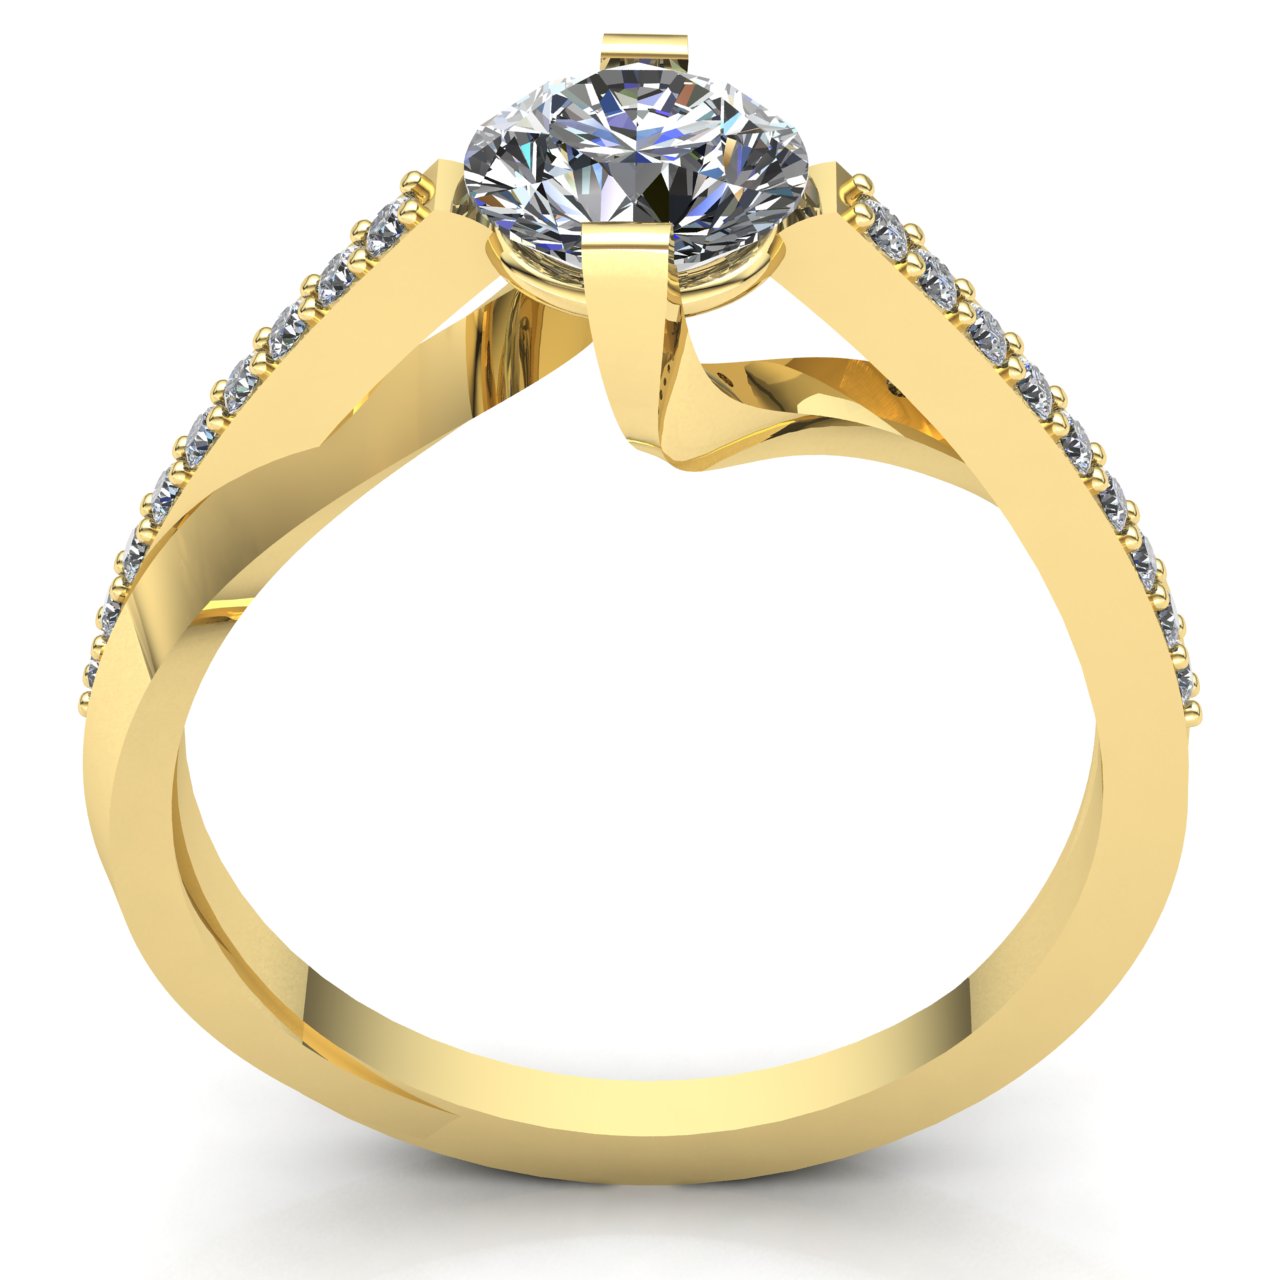 Jewel We Sell 0.33carat Round Cut Diamond Ladies Accent Solitaire Anniversary Engagement Ring Solid 18K White, Yellow, or Rose Gold F VS1